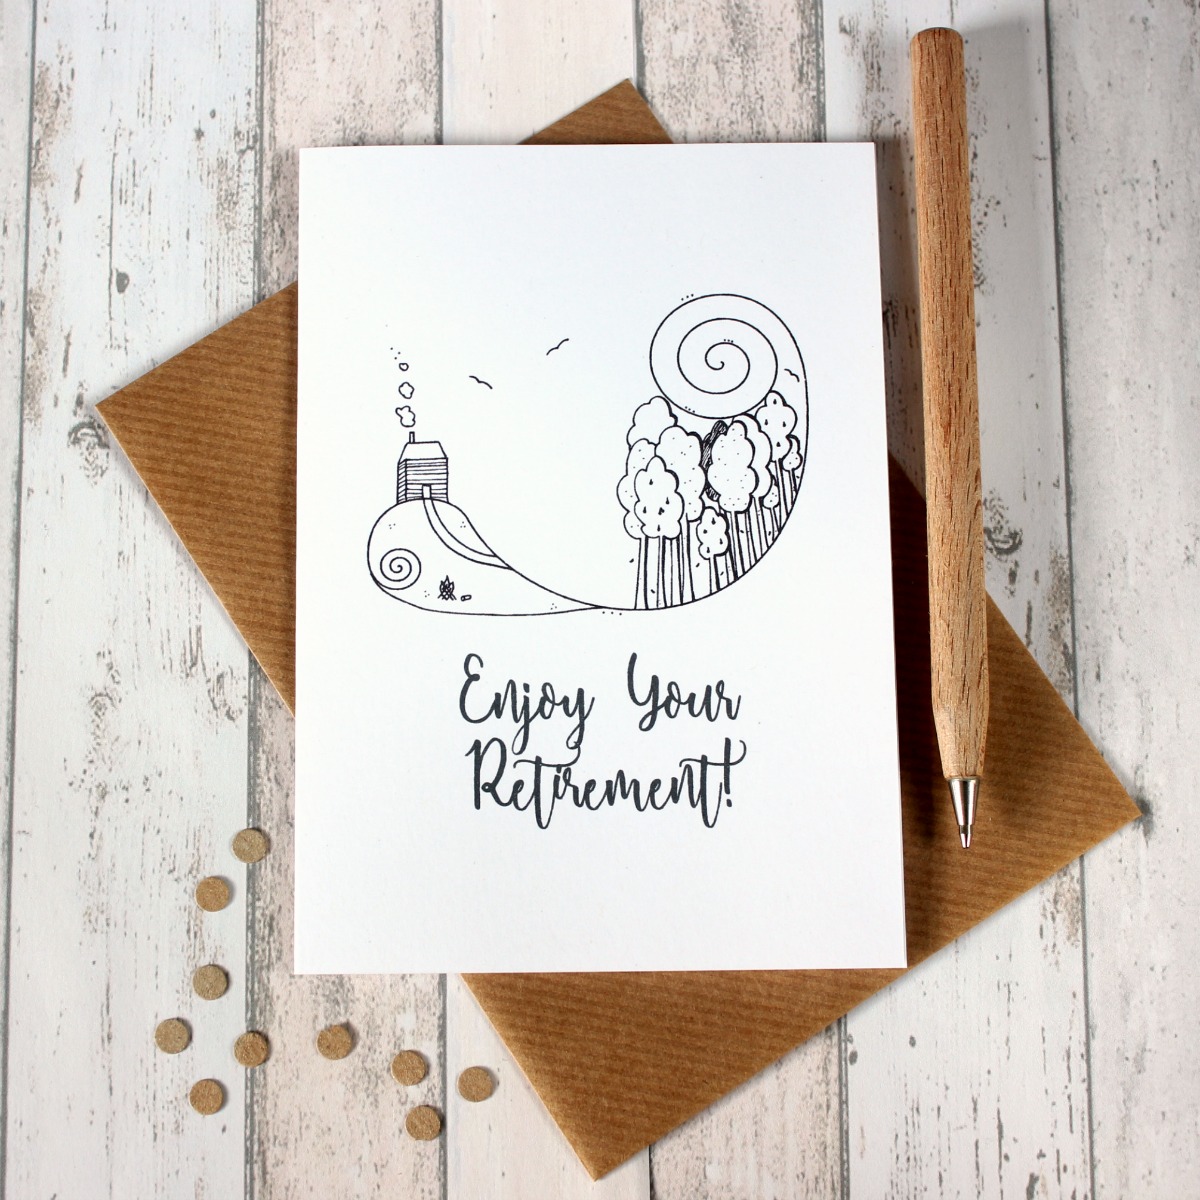 Enjoy Your Retirement, Cabin In The Woods, Illustrated Retirement Card